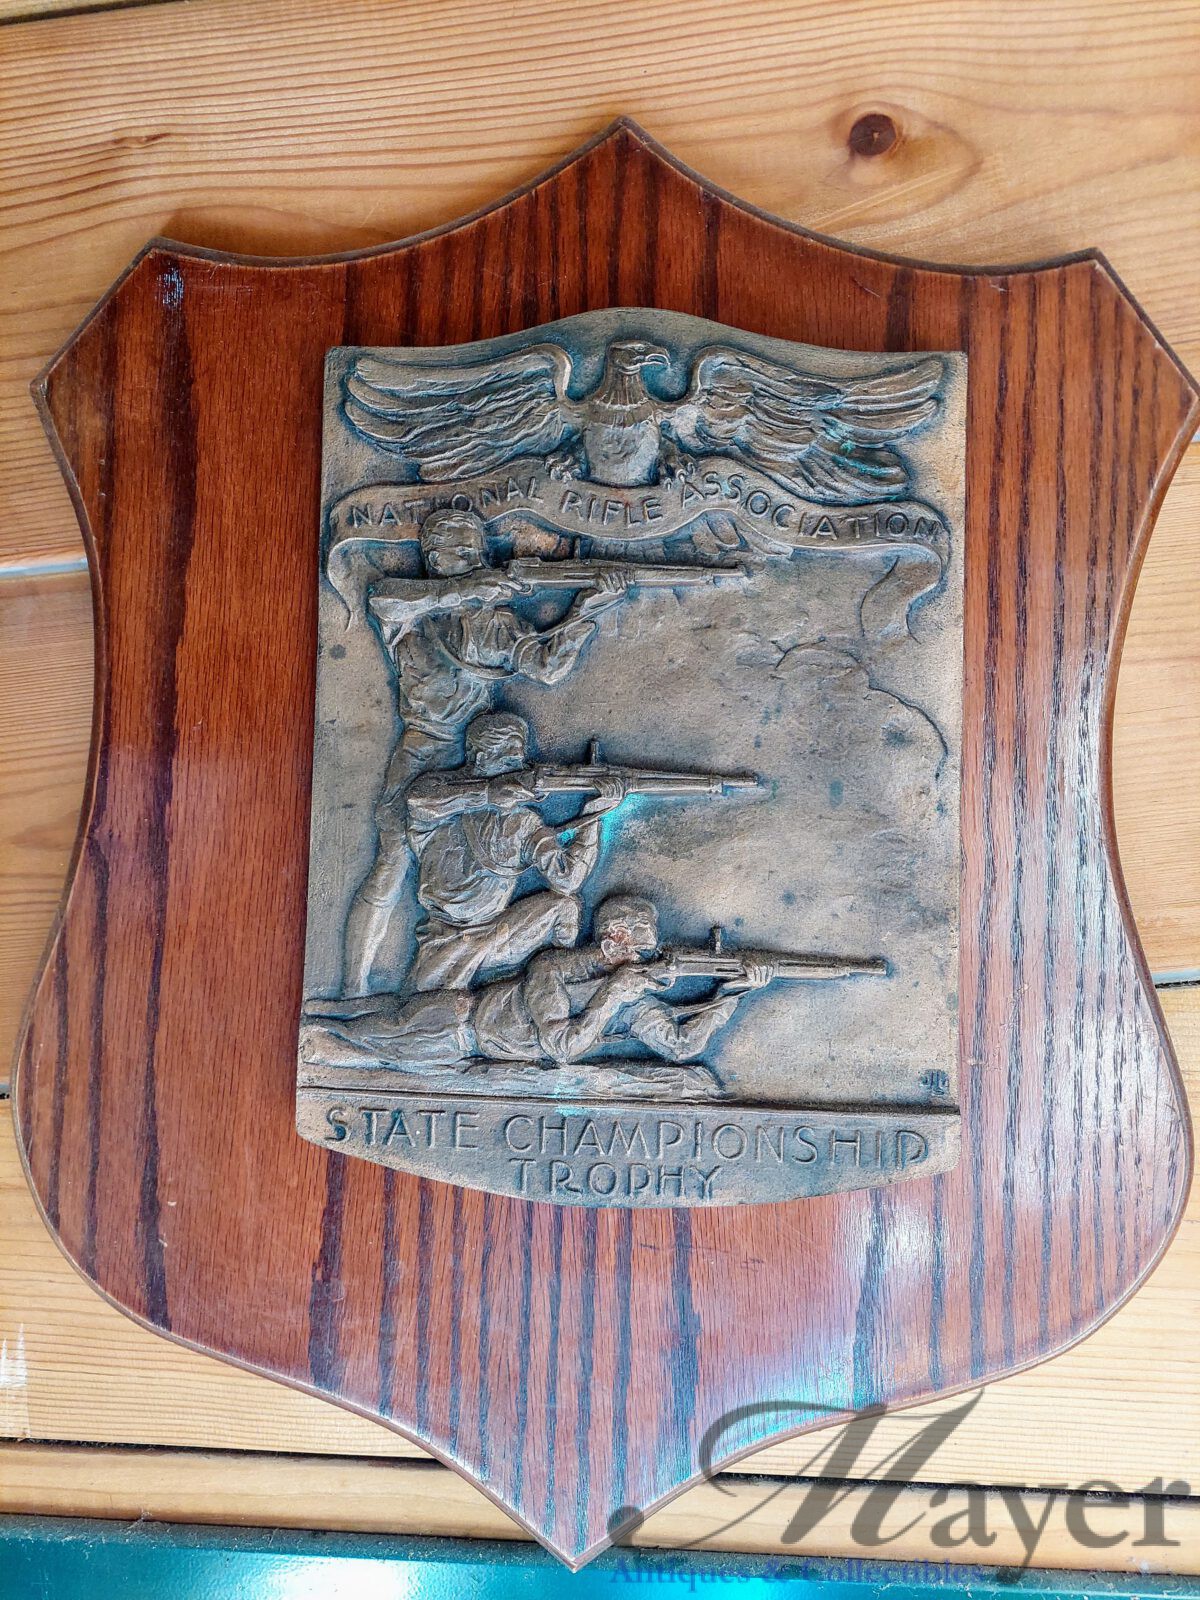 National Rifle Association State Championship Trophy